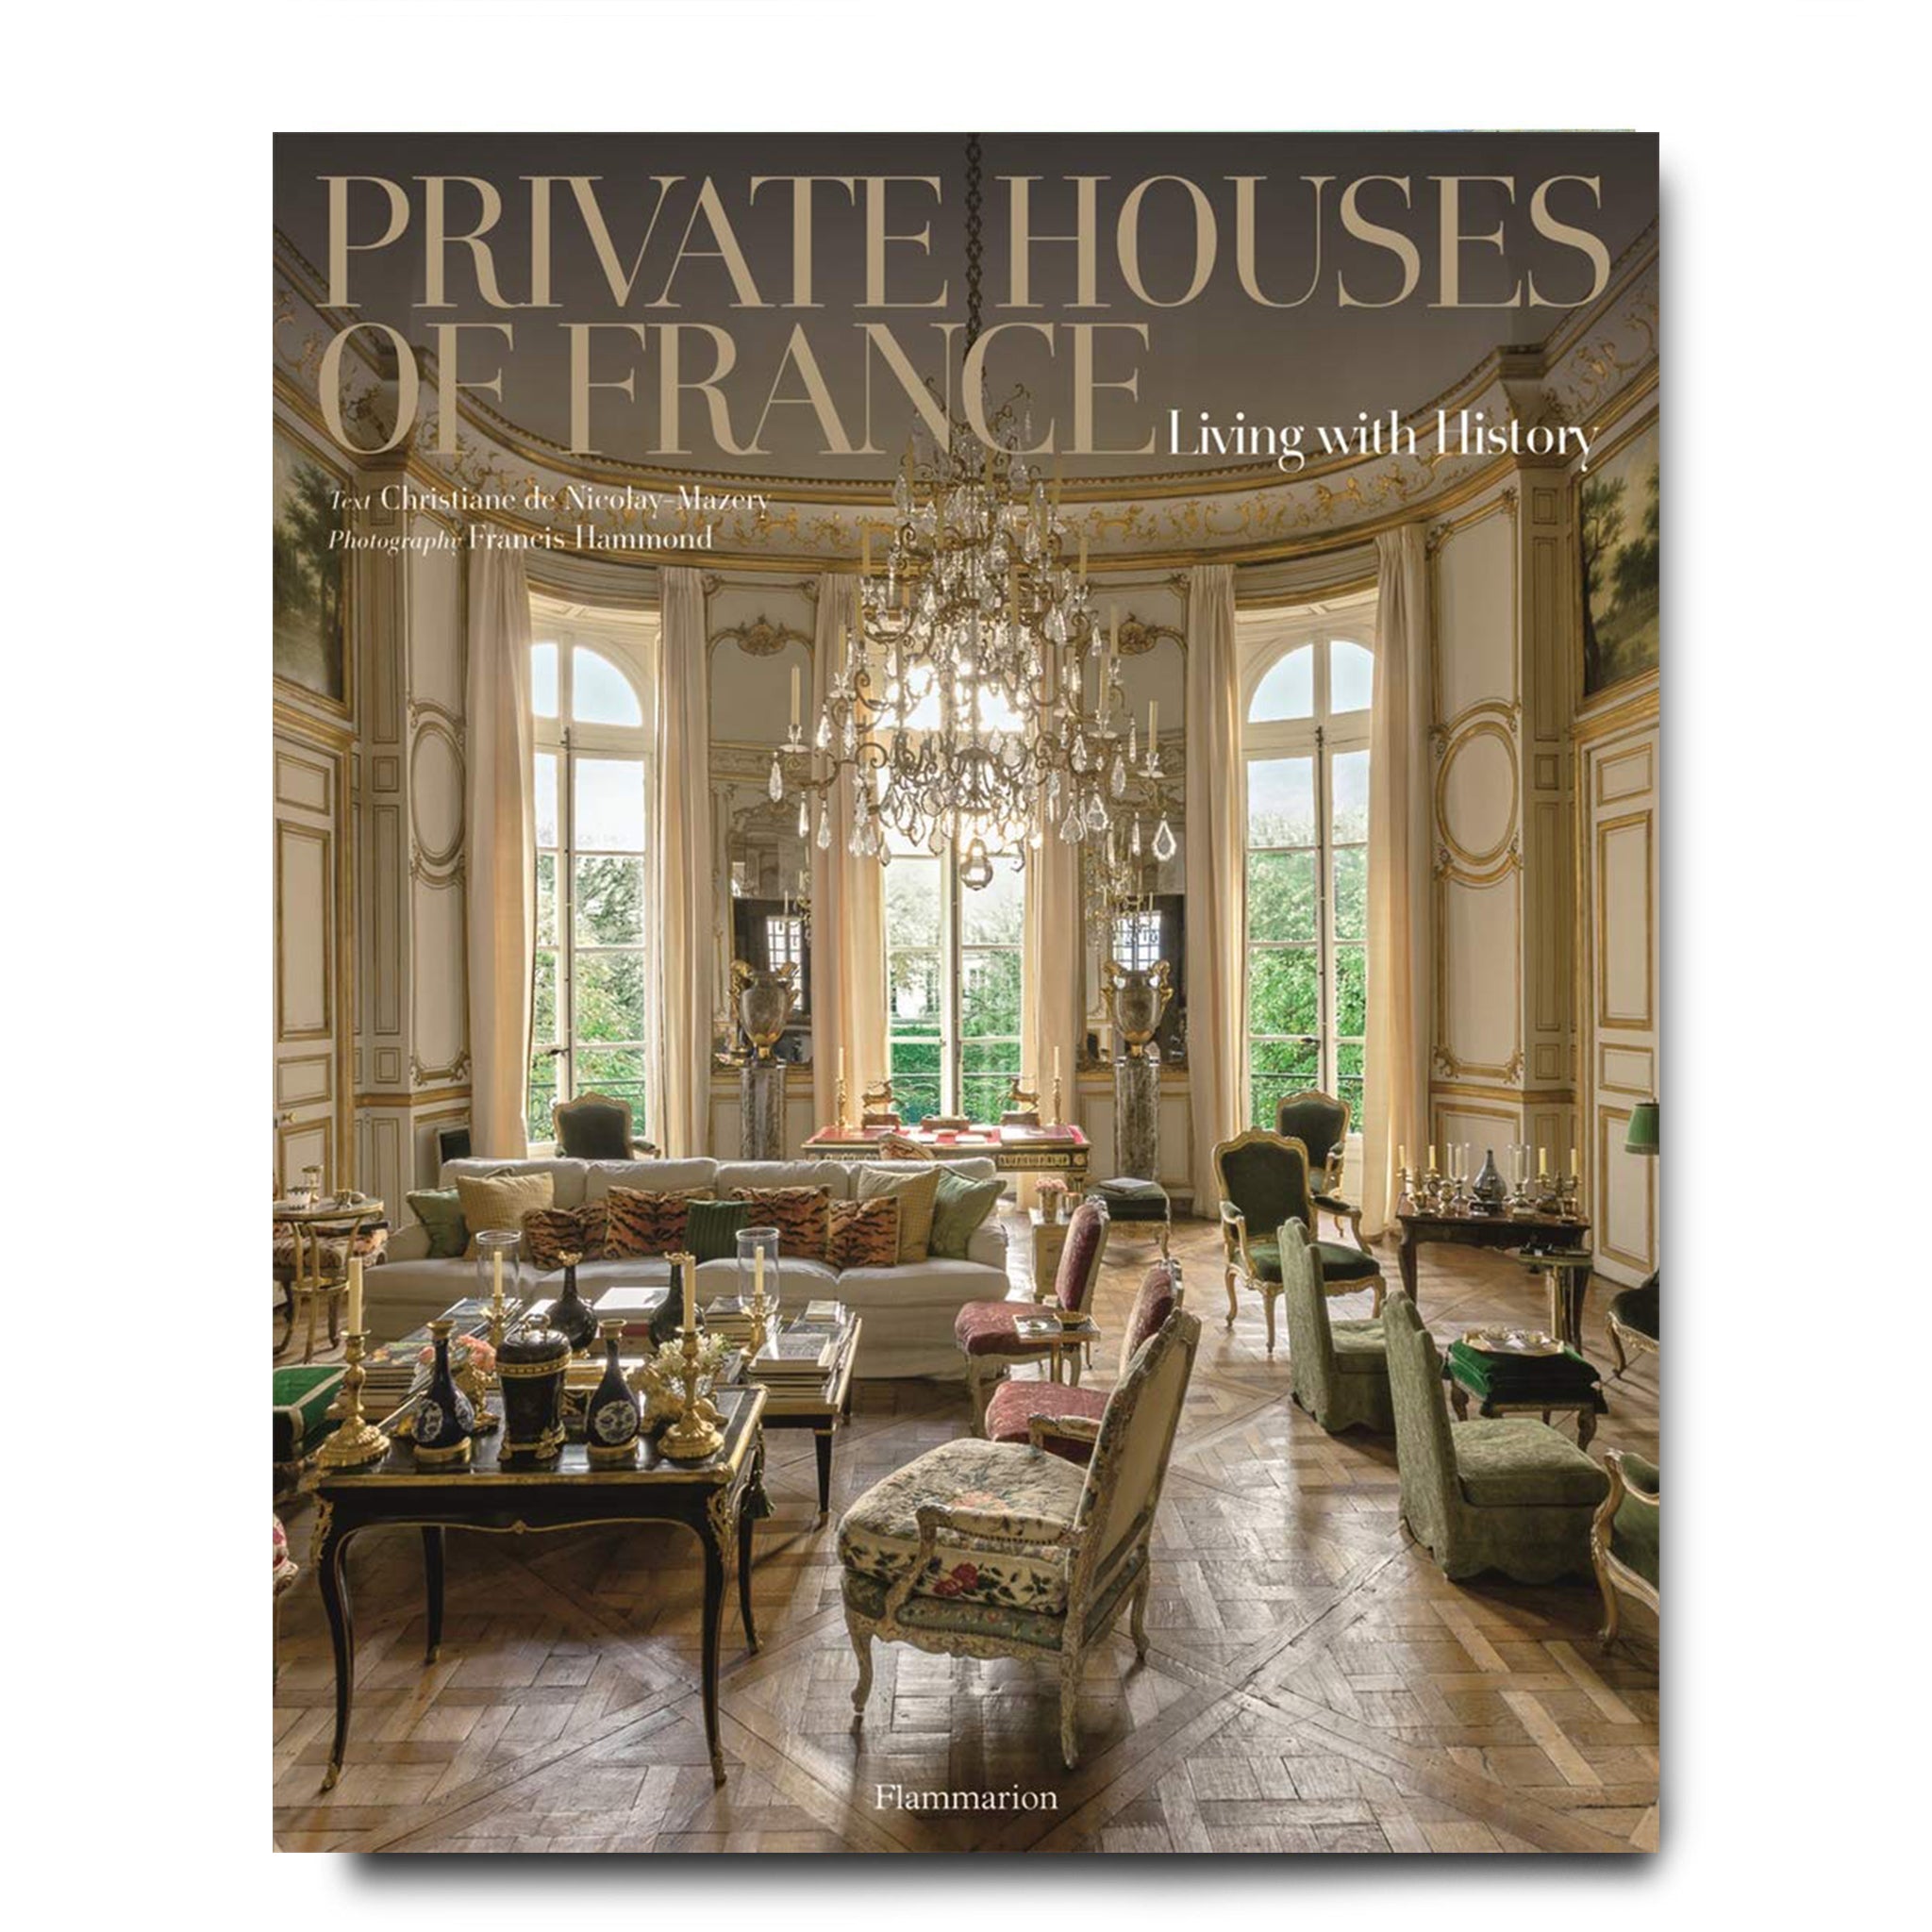 PRIVATE HOUSES OF FRANCE